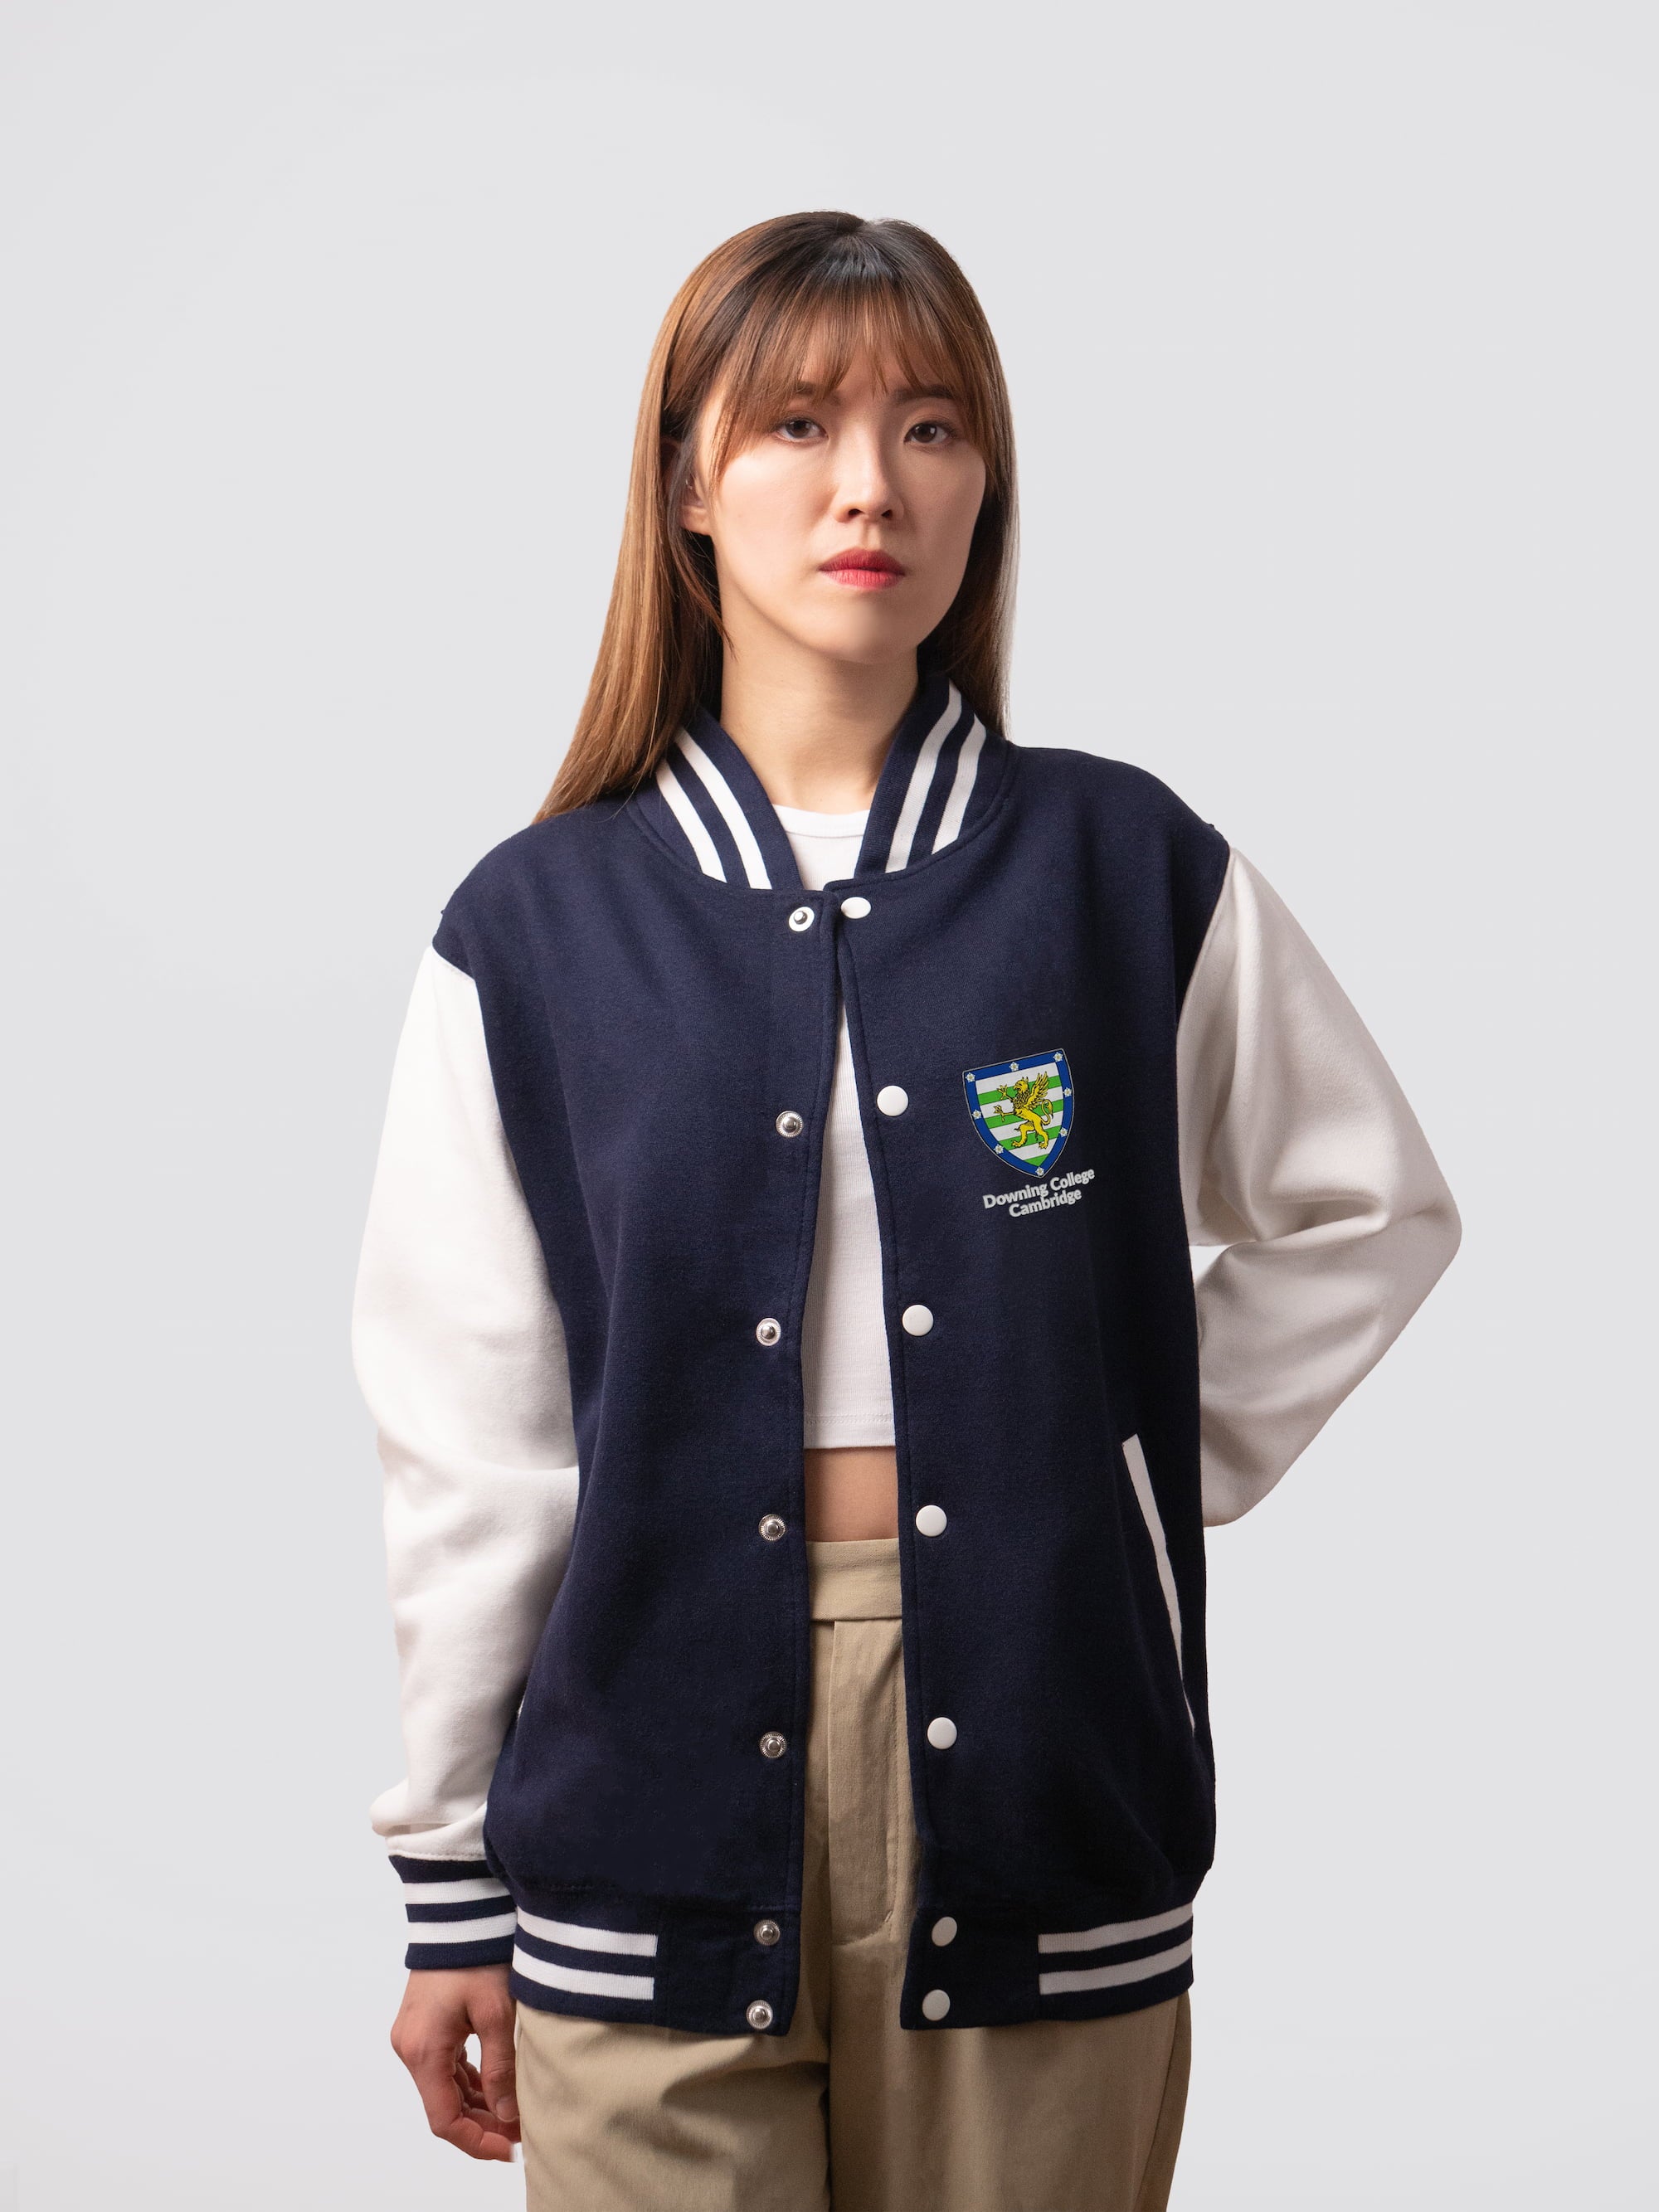 Retro style varsity jacket, with embroidered Downing crest